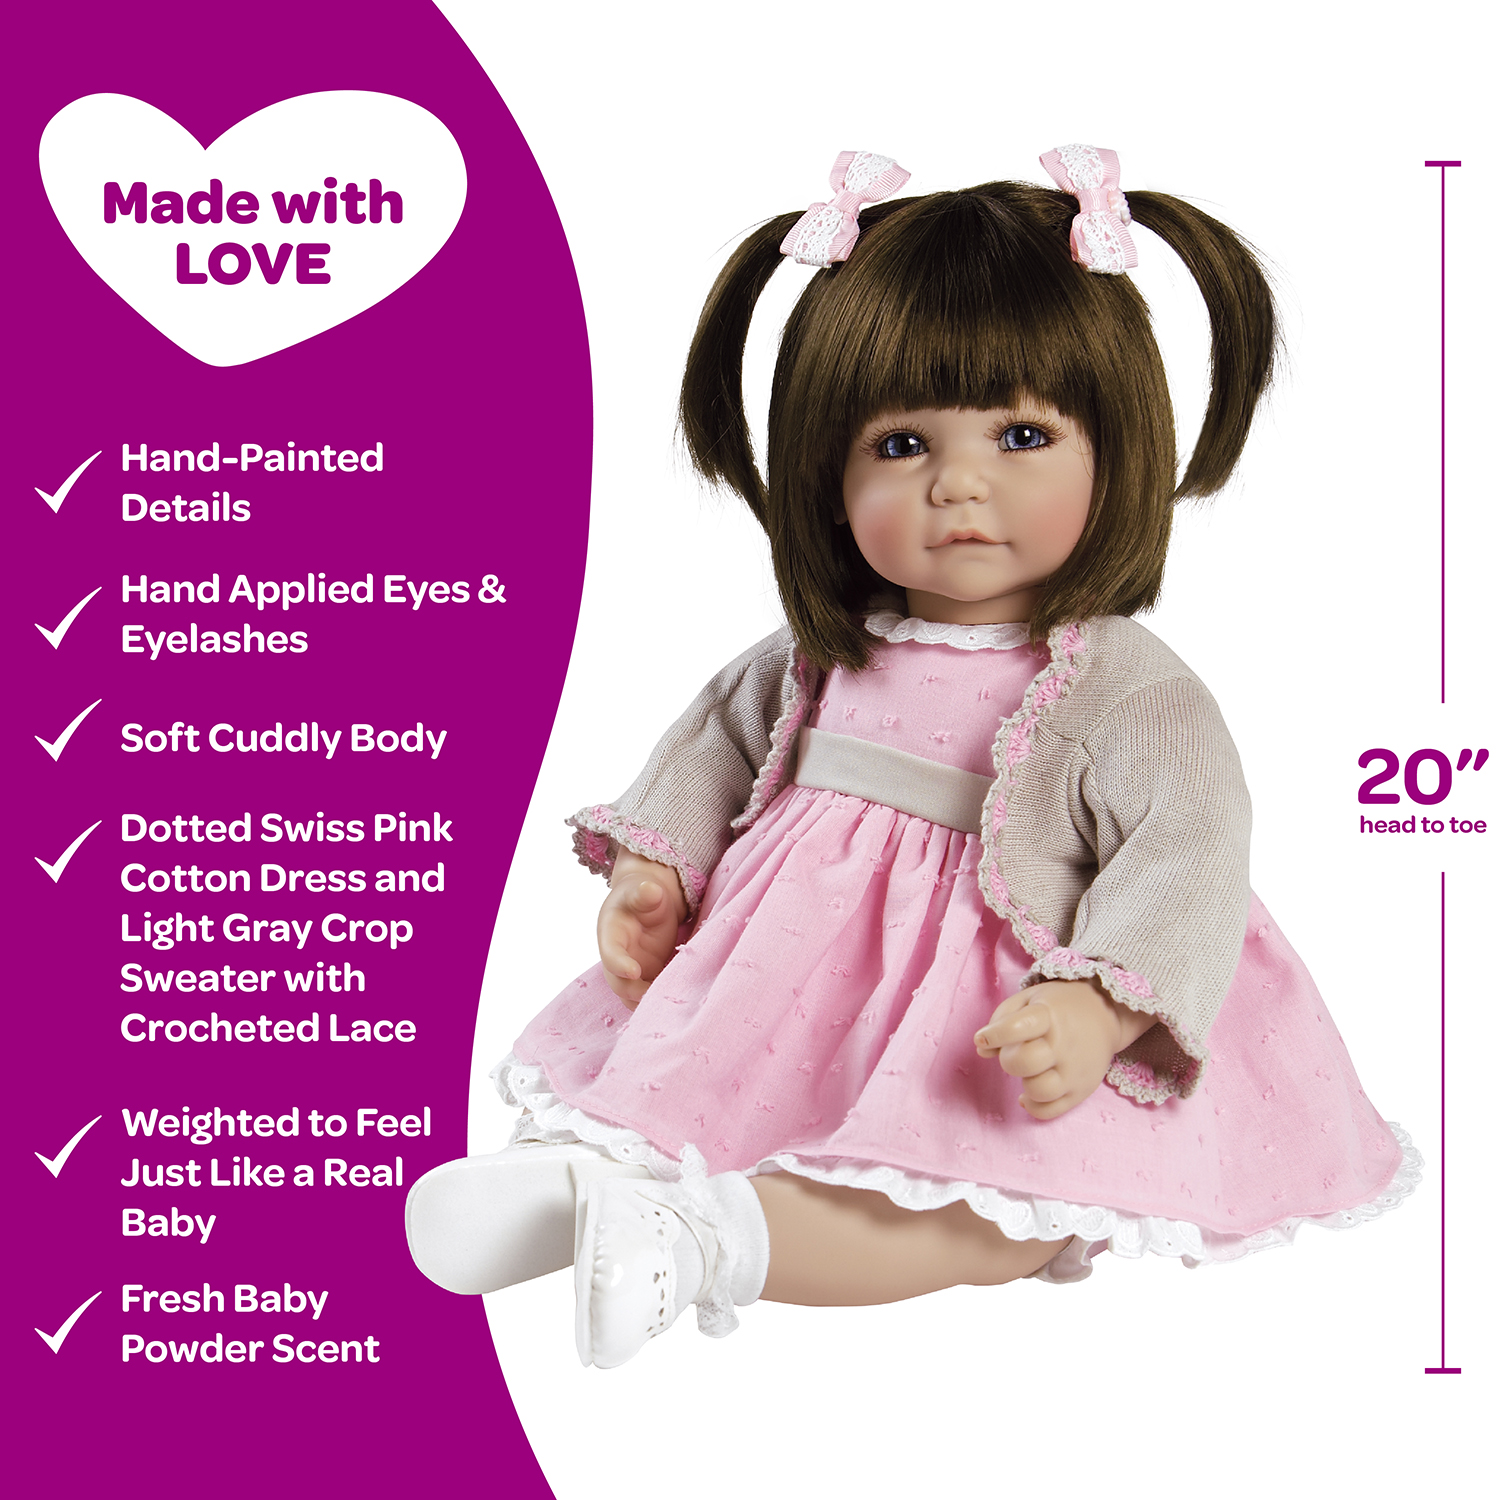 Adora ToddlerTime Dolls from Head to Toe, Made of Baby Powder Scented High Quality Vinyl, 20-inches - image 5 of 8